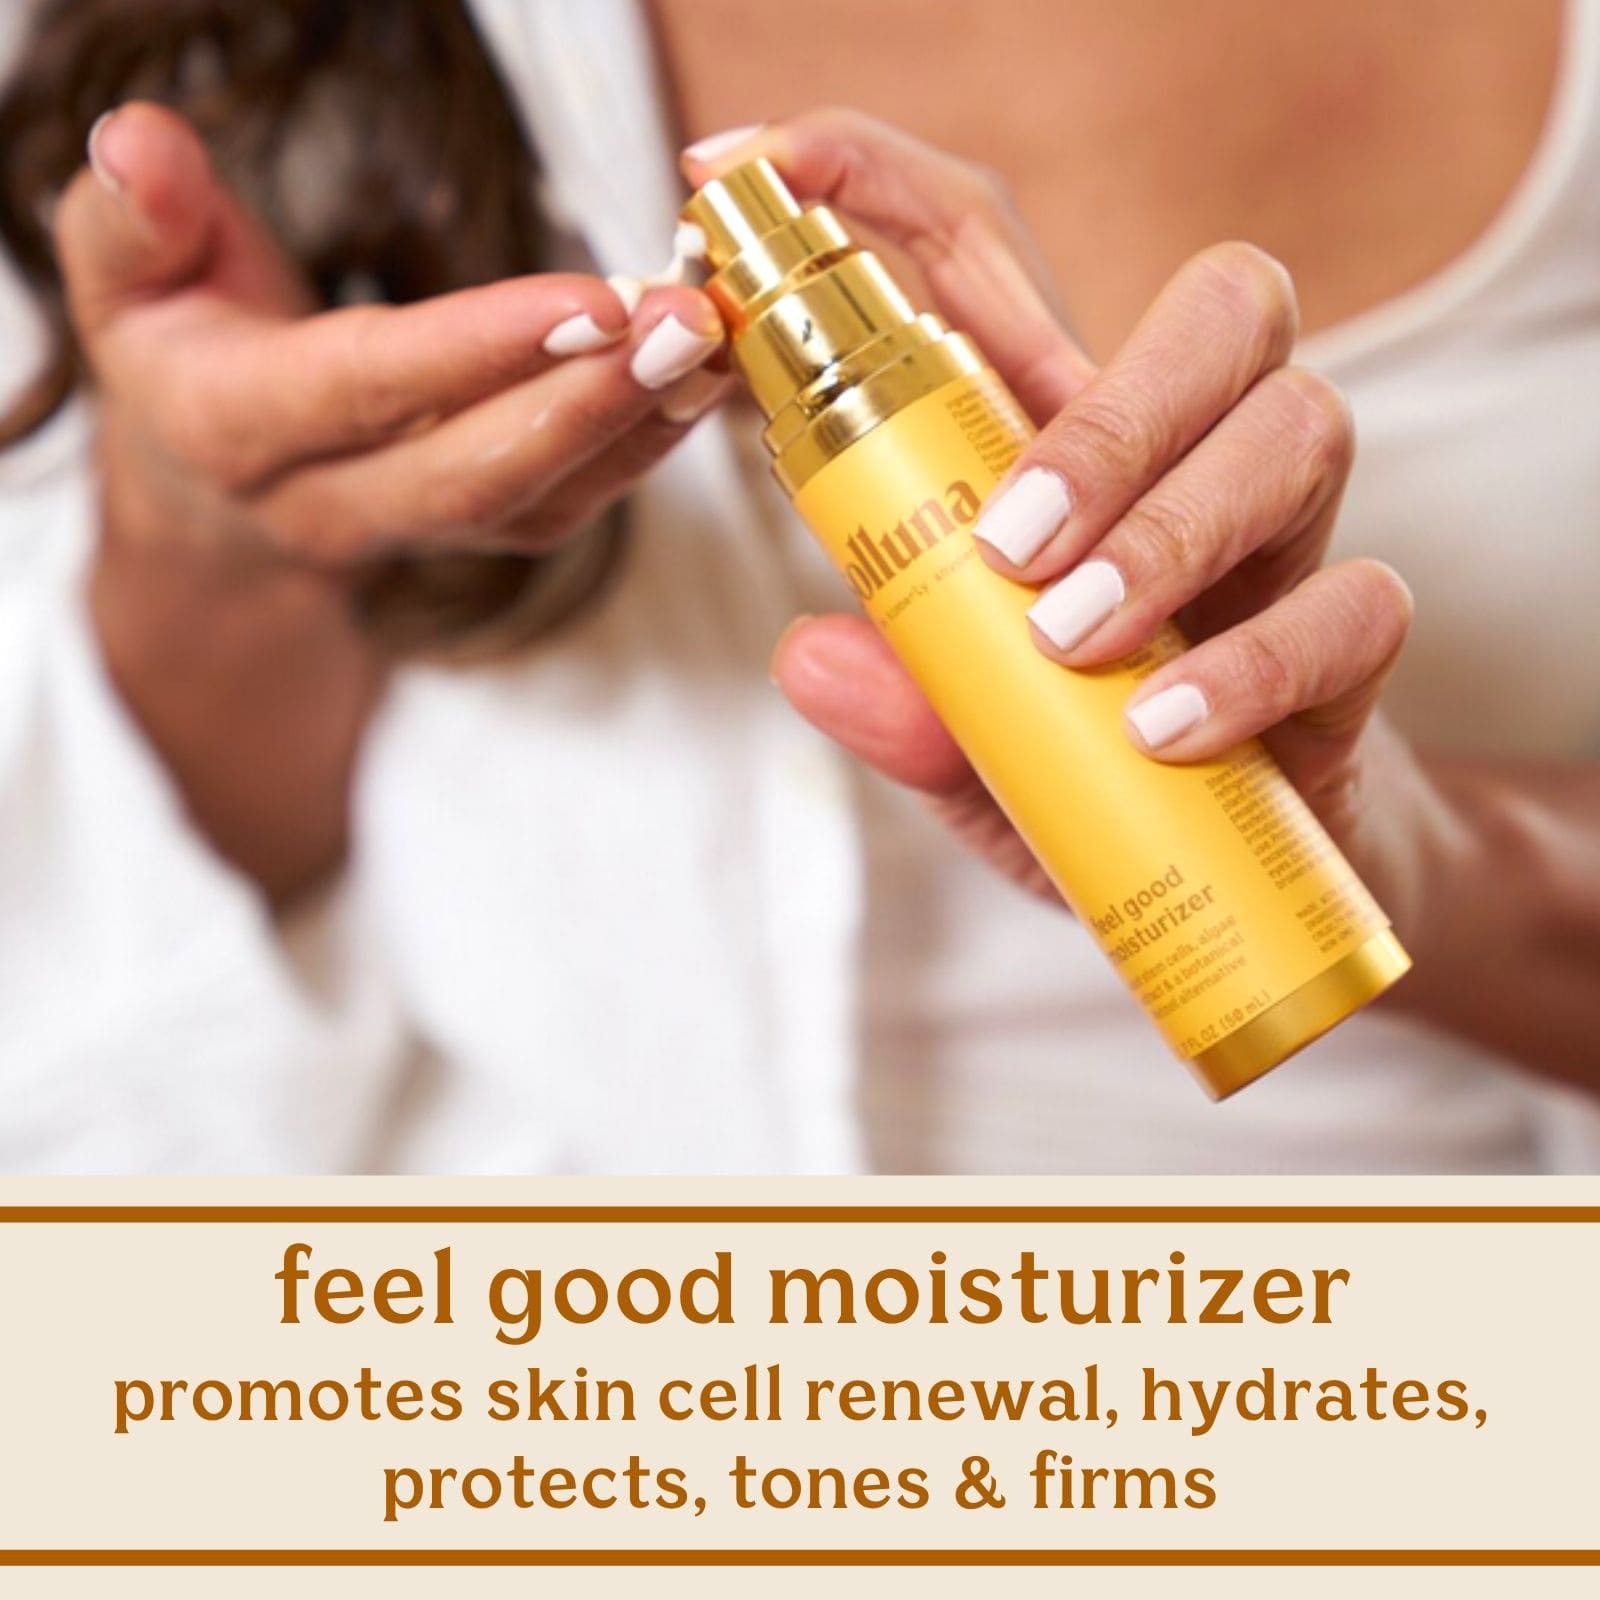 Solluna's Feel Good Moisturizer Promotes Skin Cell Renewall, Hydrates, Protects, Tones & Firms